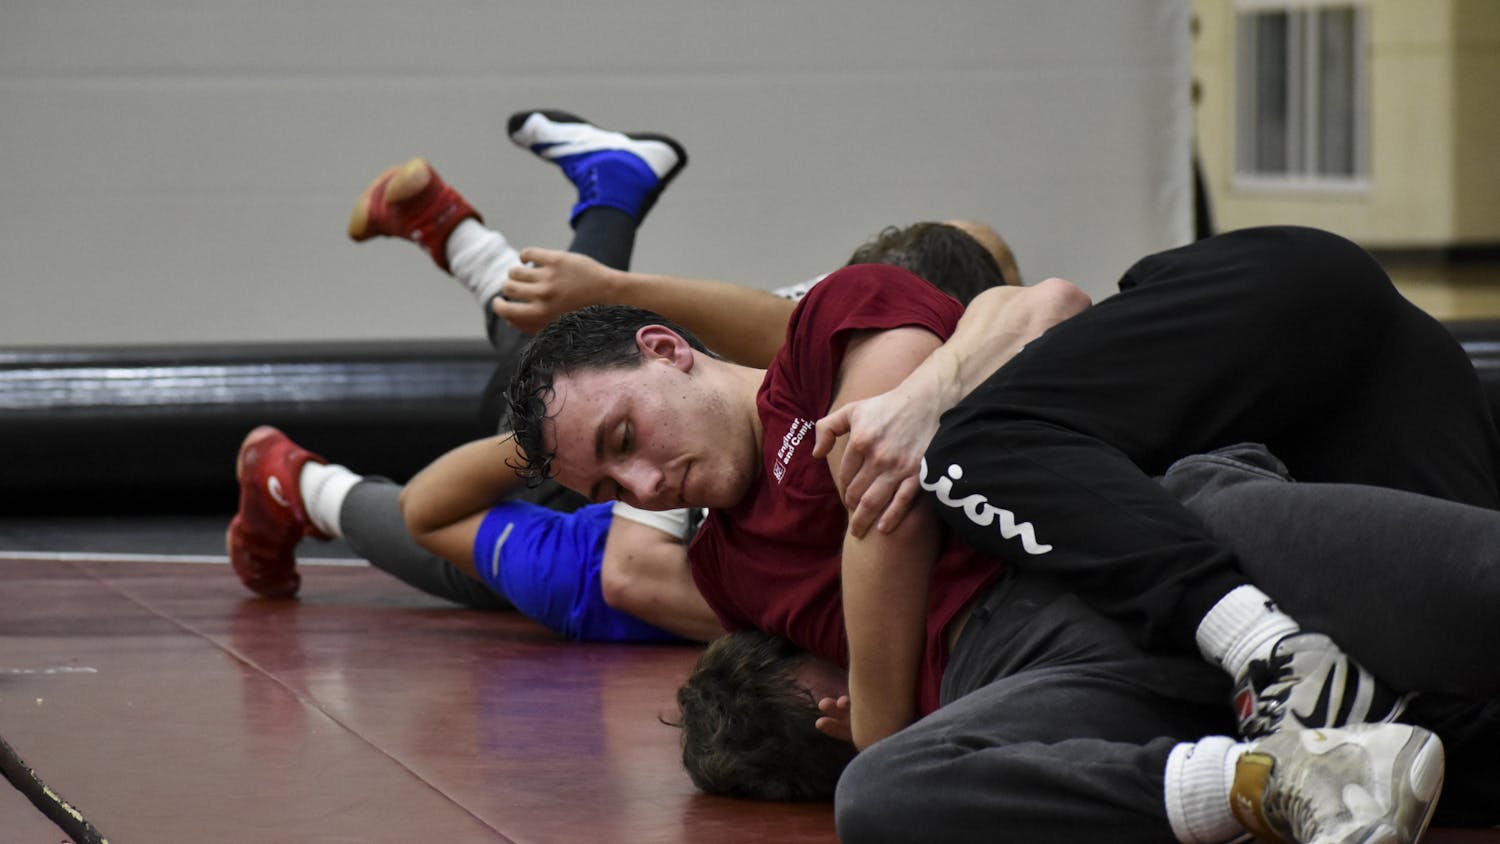 Members of the University of South Carolina's club wrestling team work on making pins during their practice at Strom Thurmond Wellness and Fitness Center on Feb. 1, 2023. The wrestling team practices on Mondays and Wednesdays to prepare for tournaments.&nbsp;